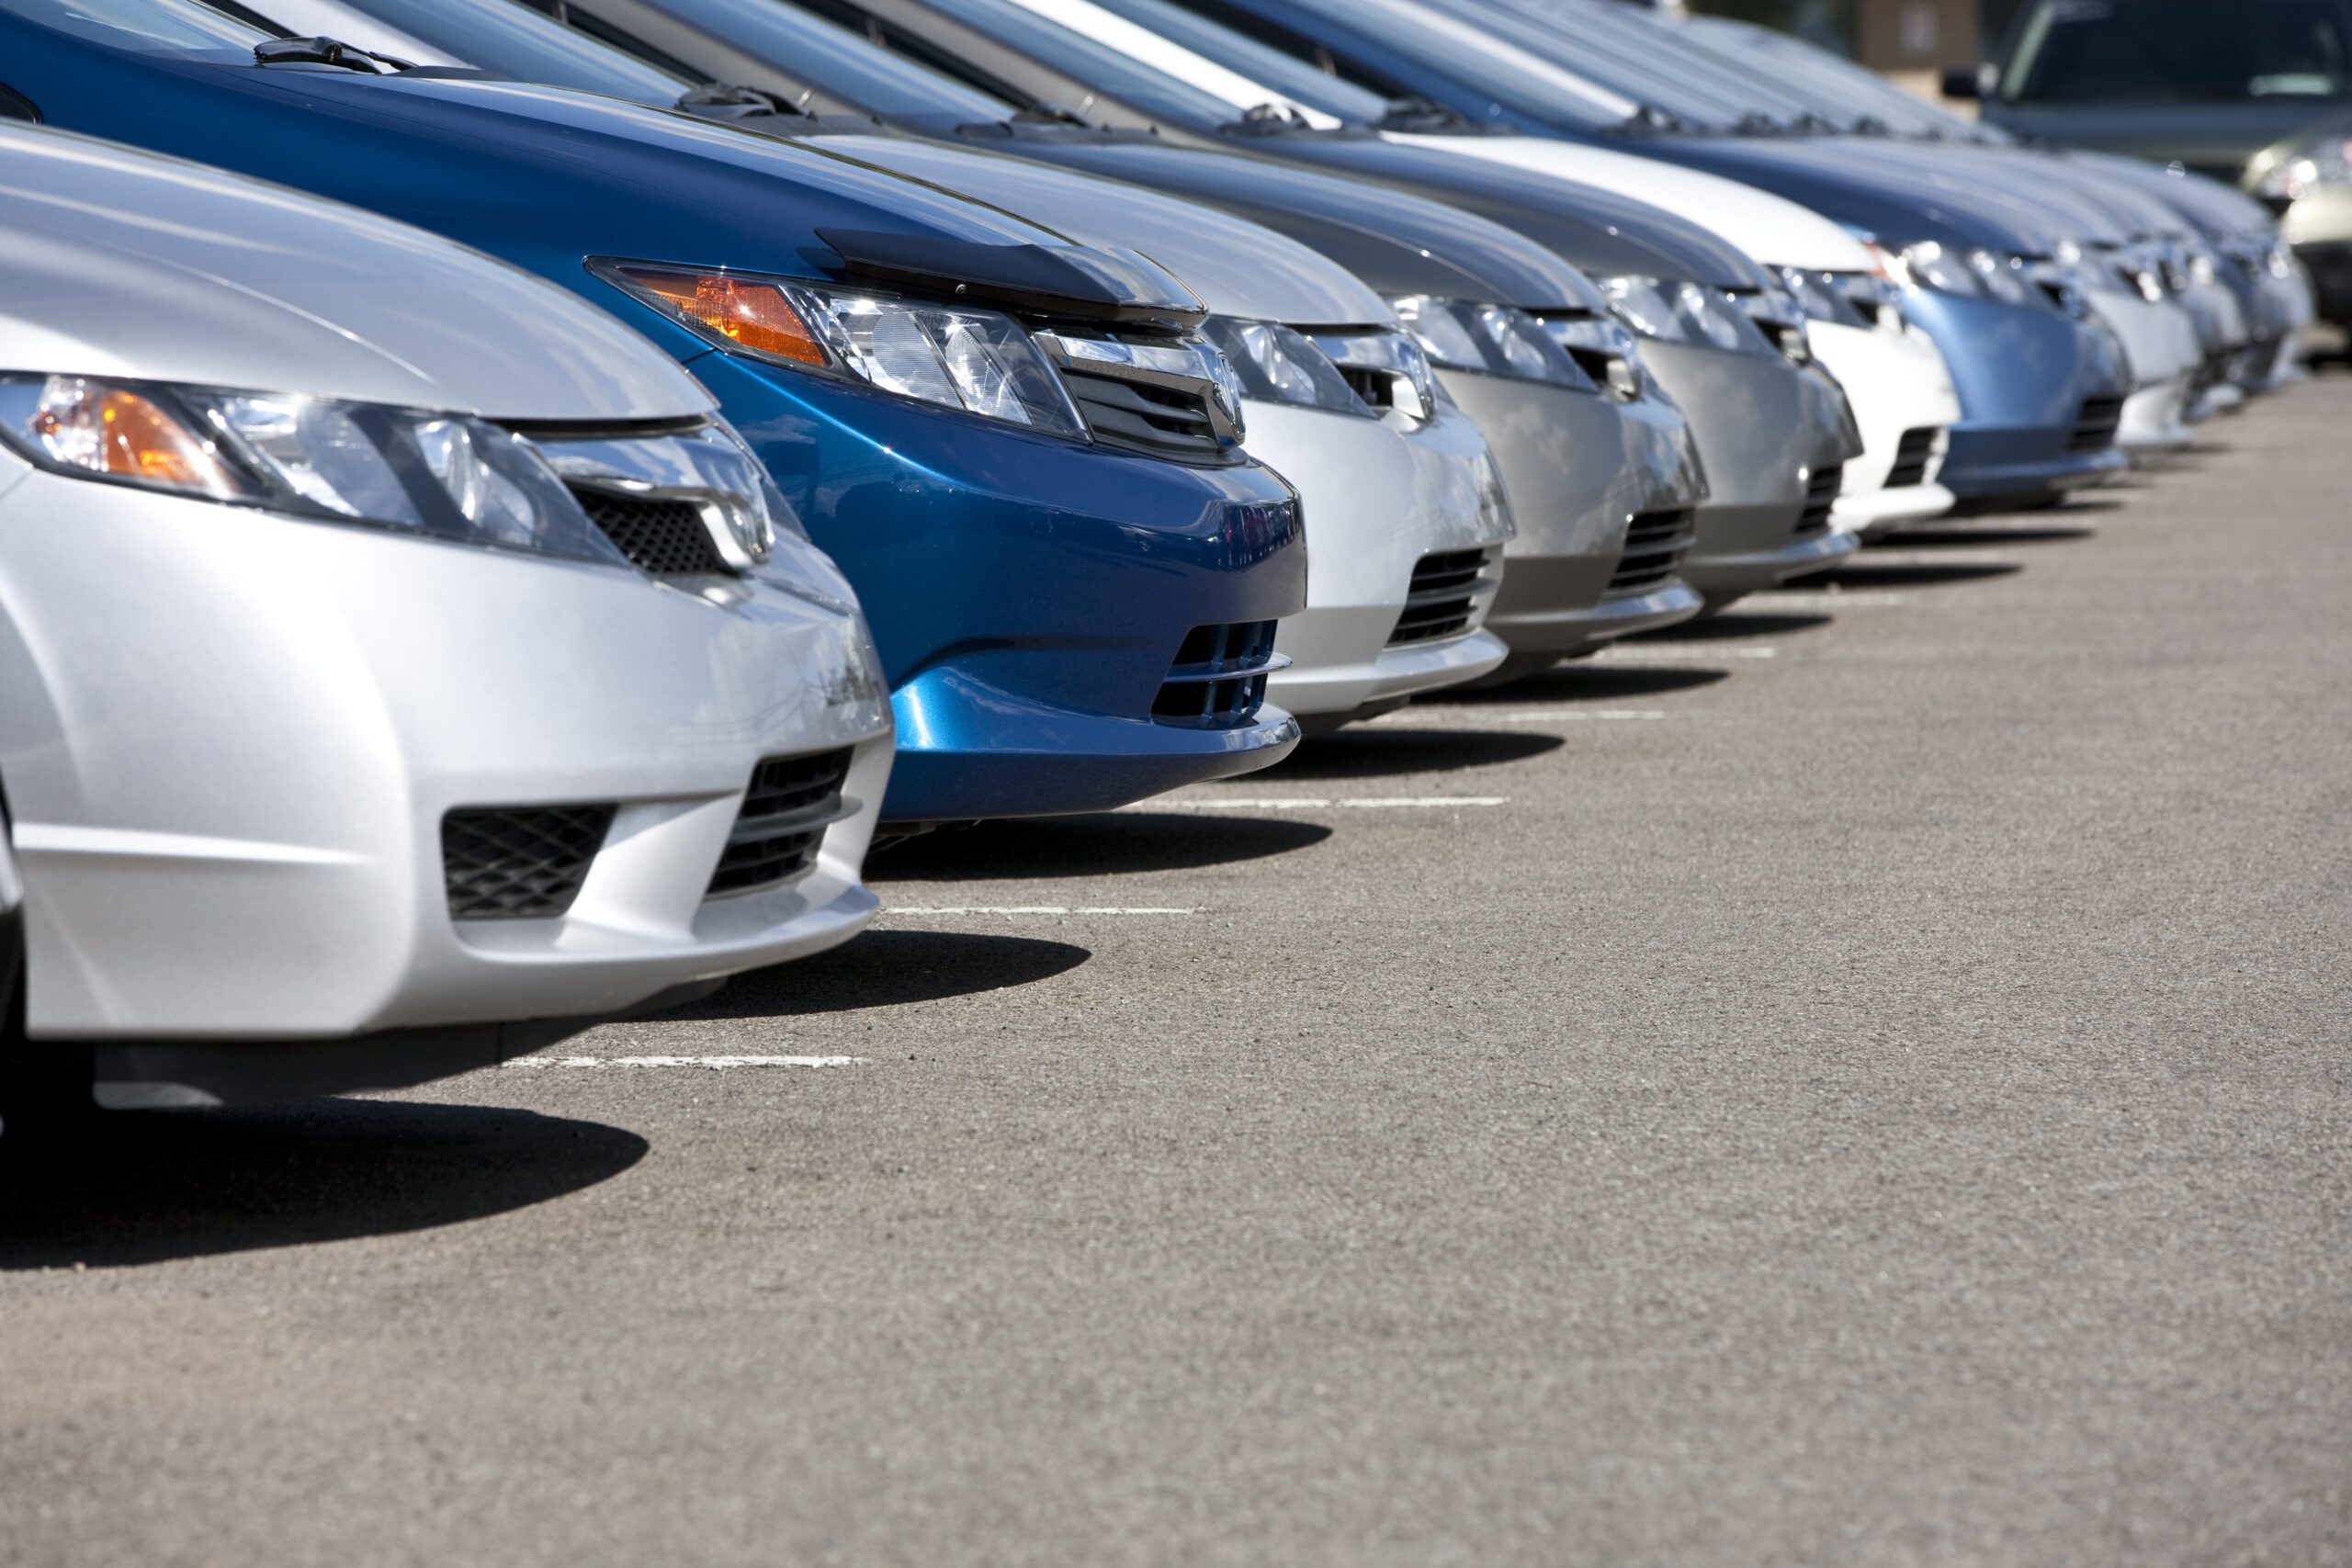 Lineup of new fuel efficient compact cars in dealership's parking lot, narrow depth of field.